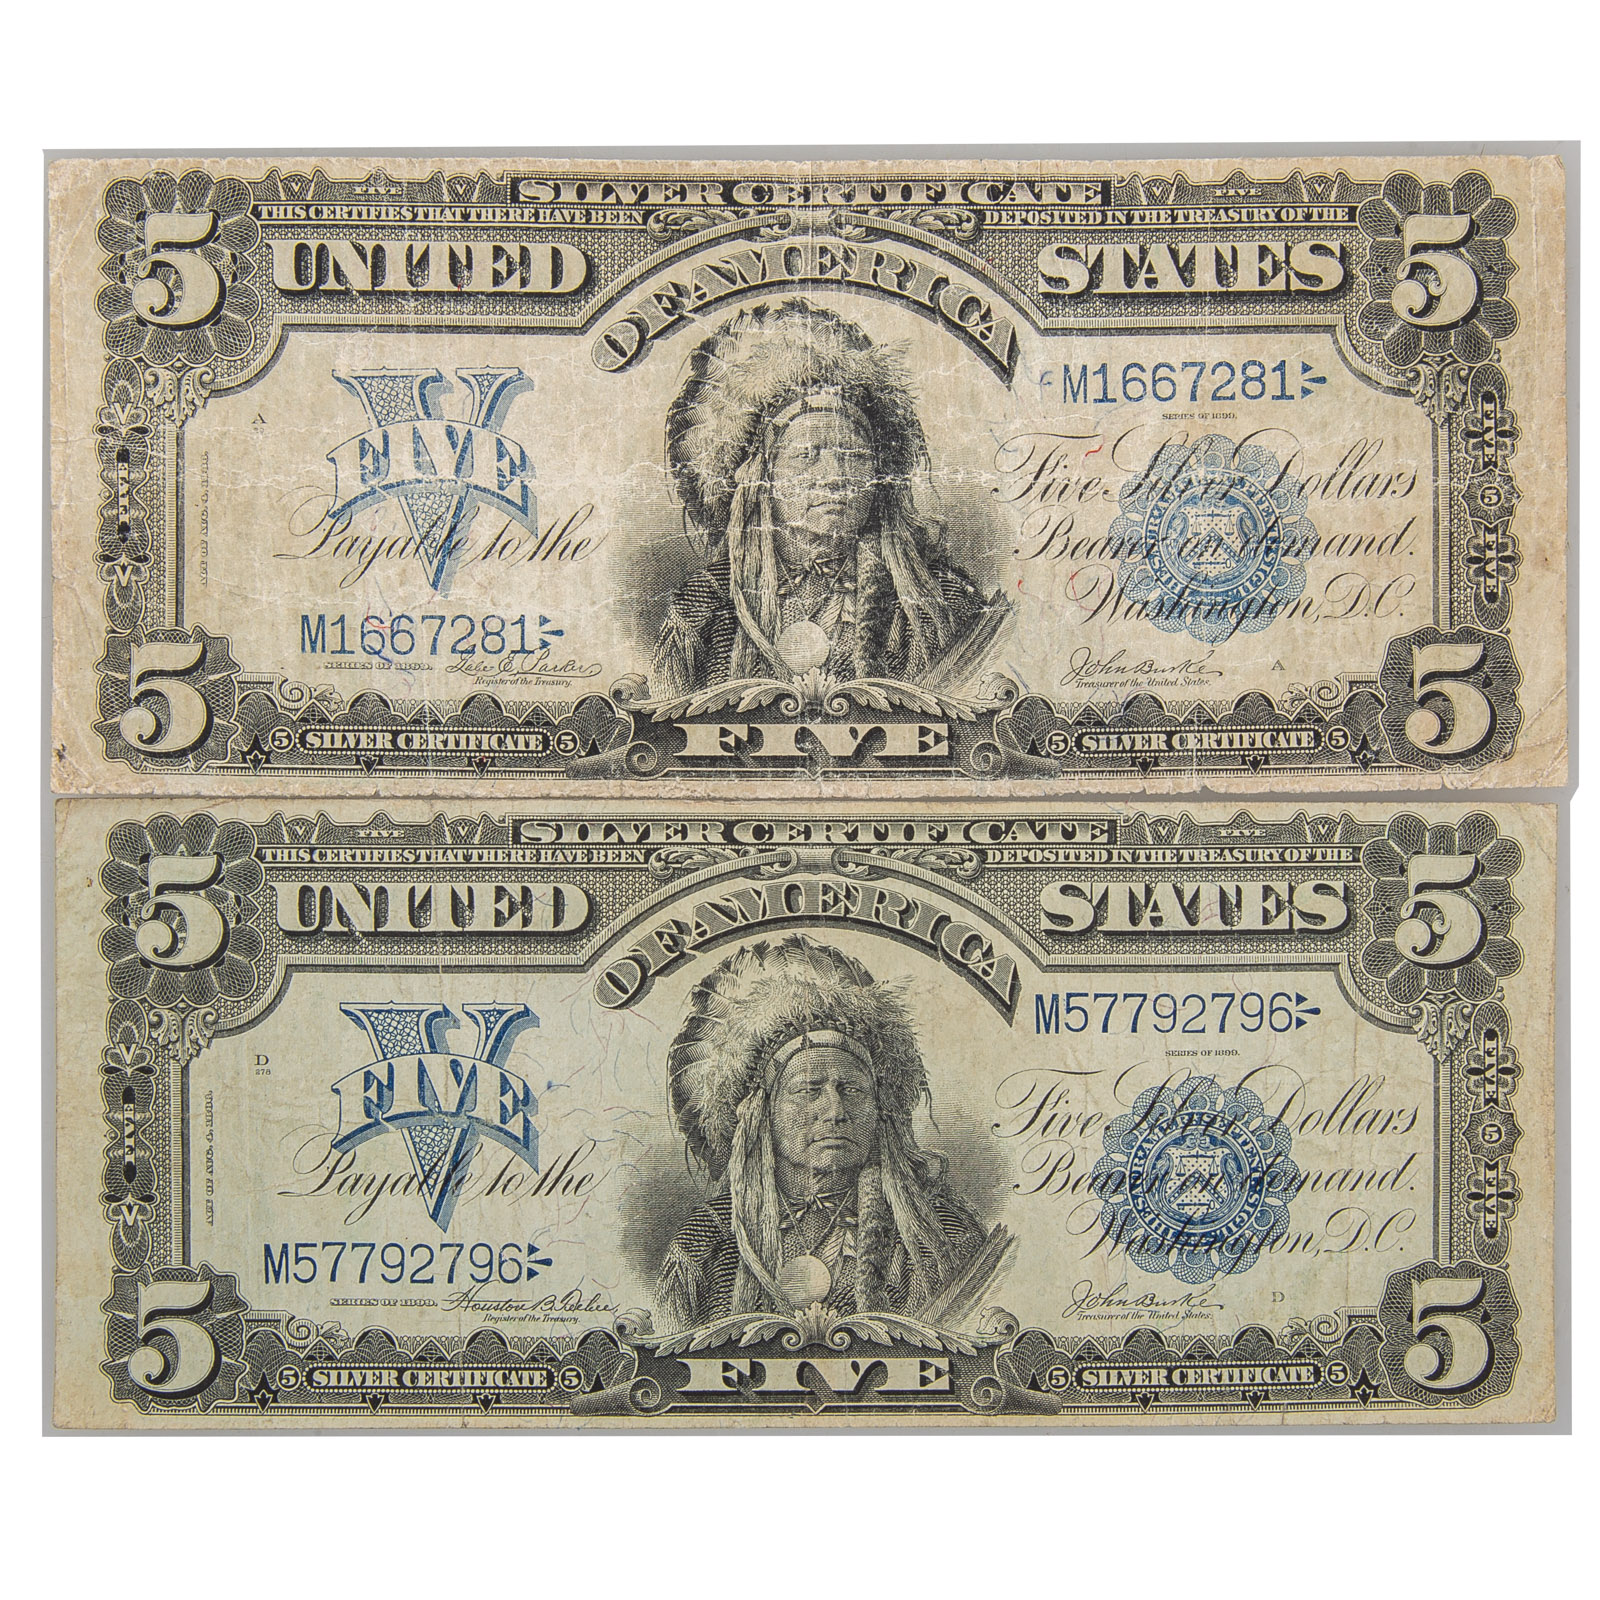 A PAIR OF 1899 $5 SILVER CERTIFICATE